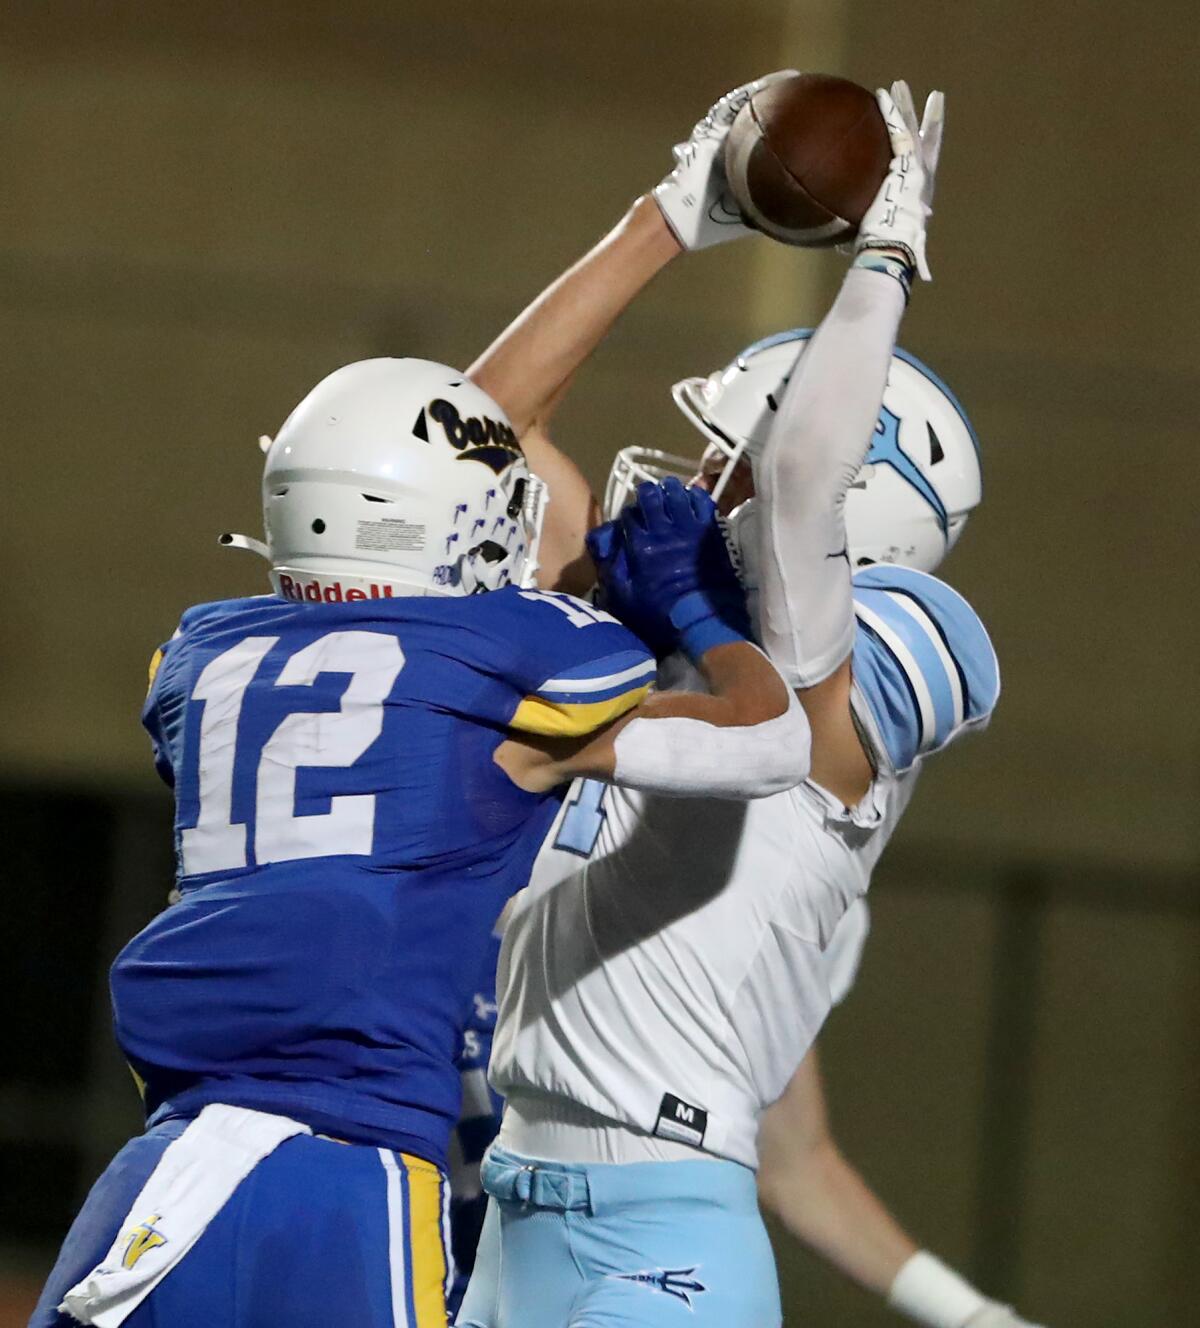 Corona del Mar's Cooper Hoch (1) makes a catch over a defender in the end zone during a Sunset League opener on Thursday.